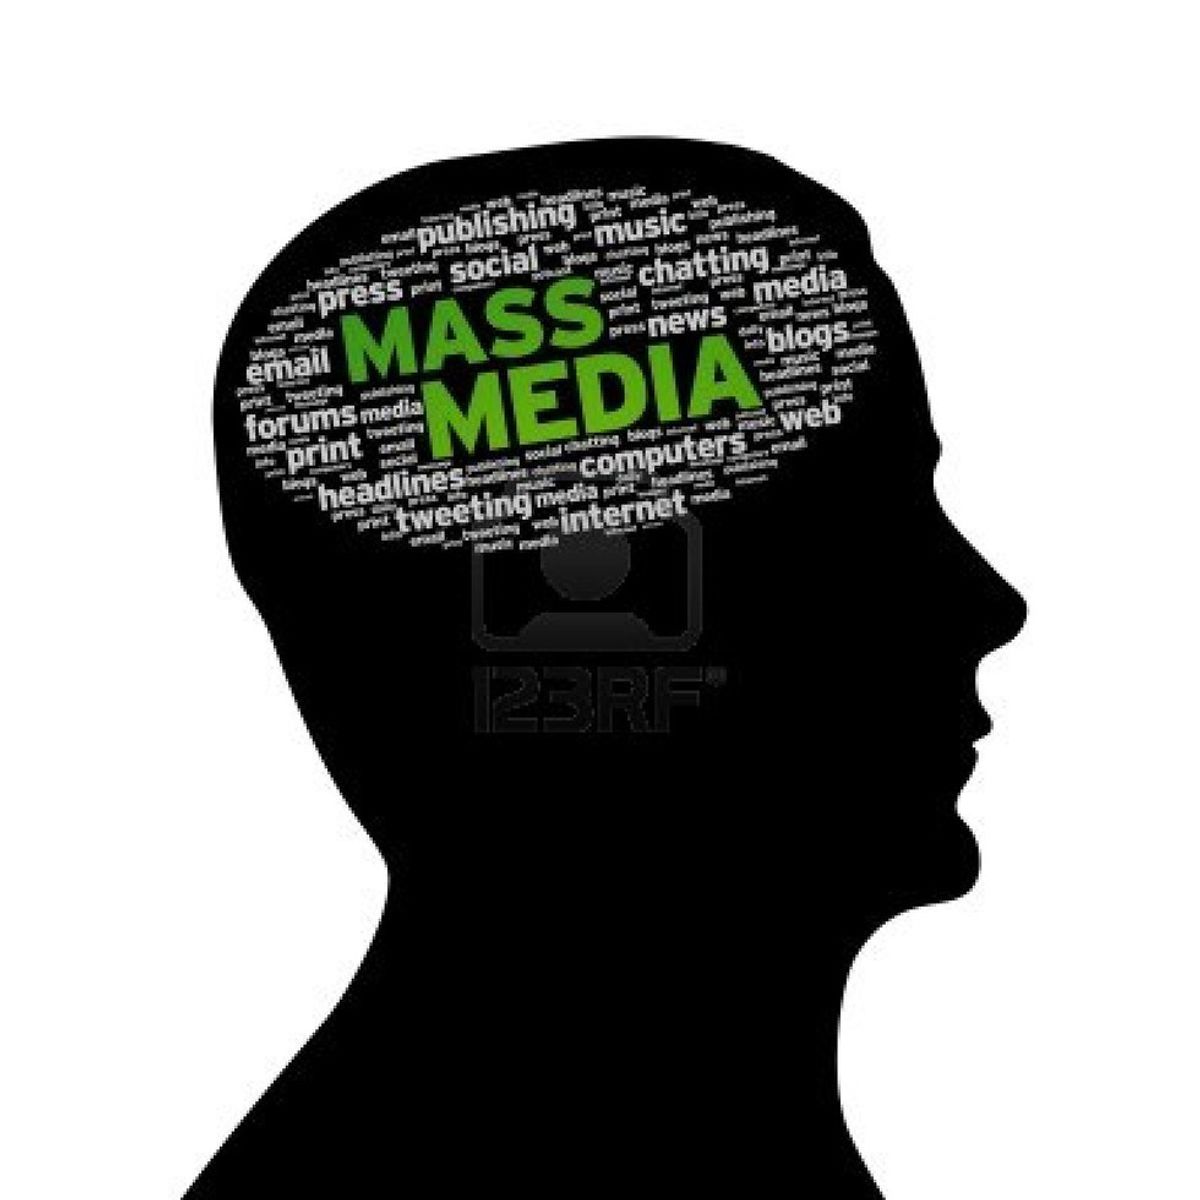 Media Outlets, It's Time To Shift Your Focus